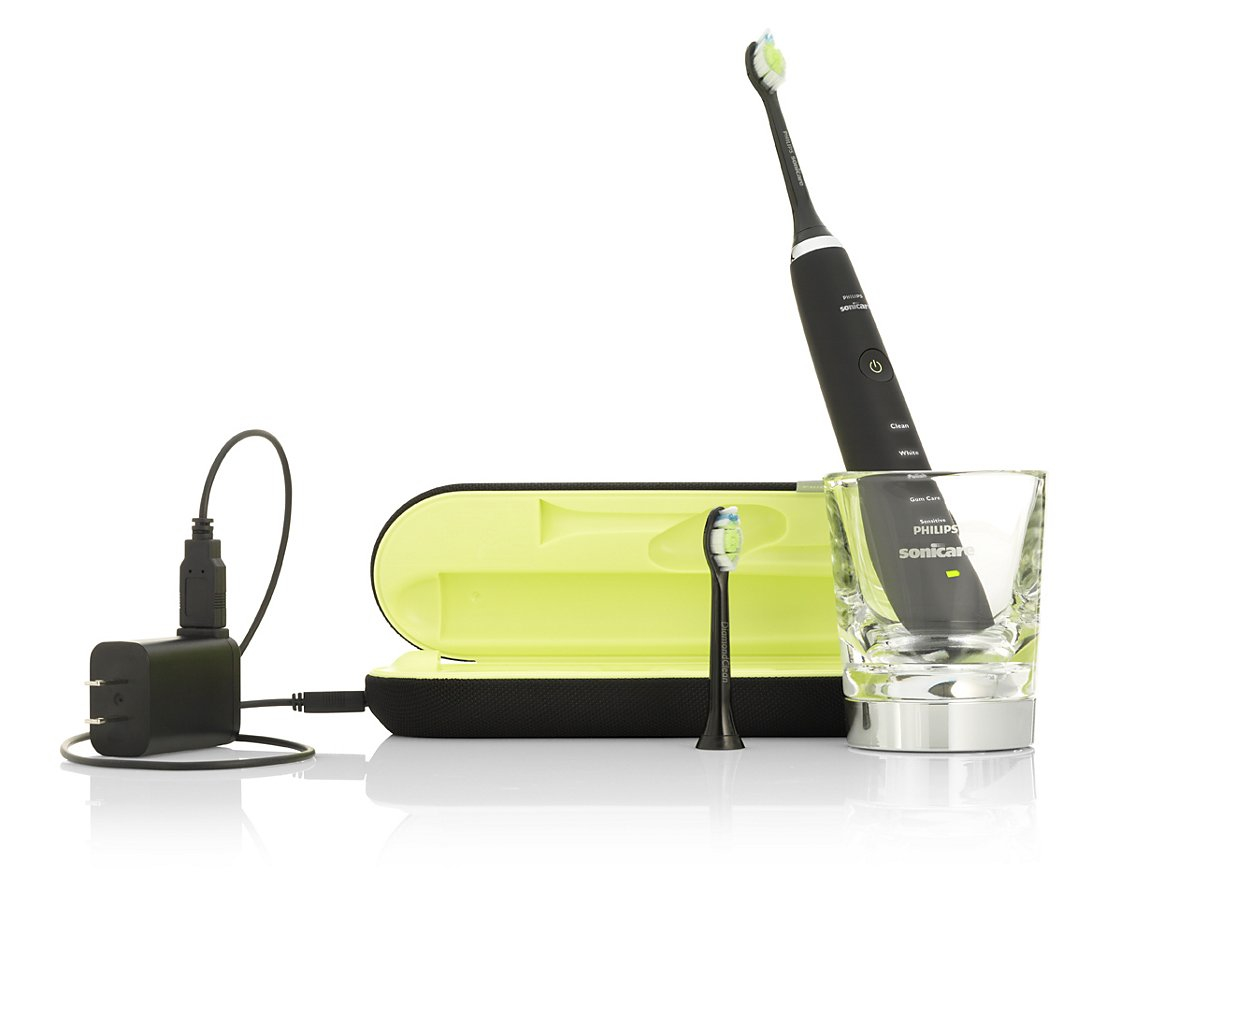 philips-sonic-care-diamondclean-is-the-perfect-toothbrush